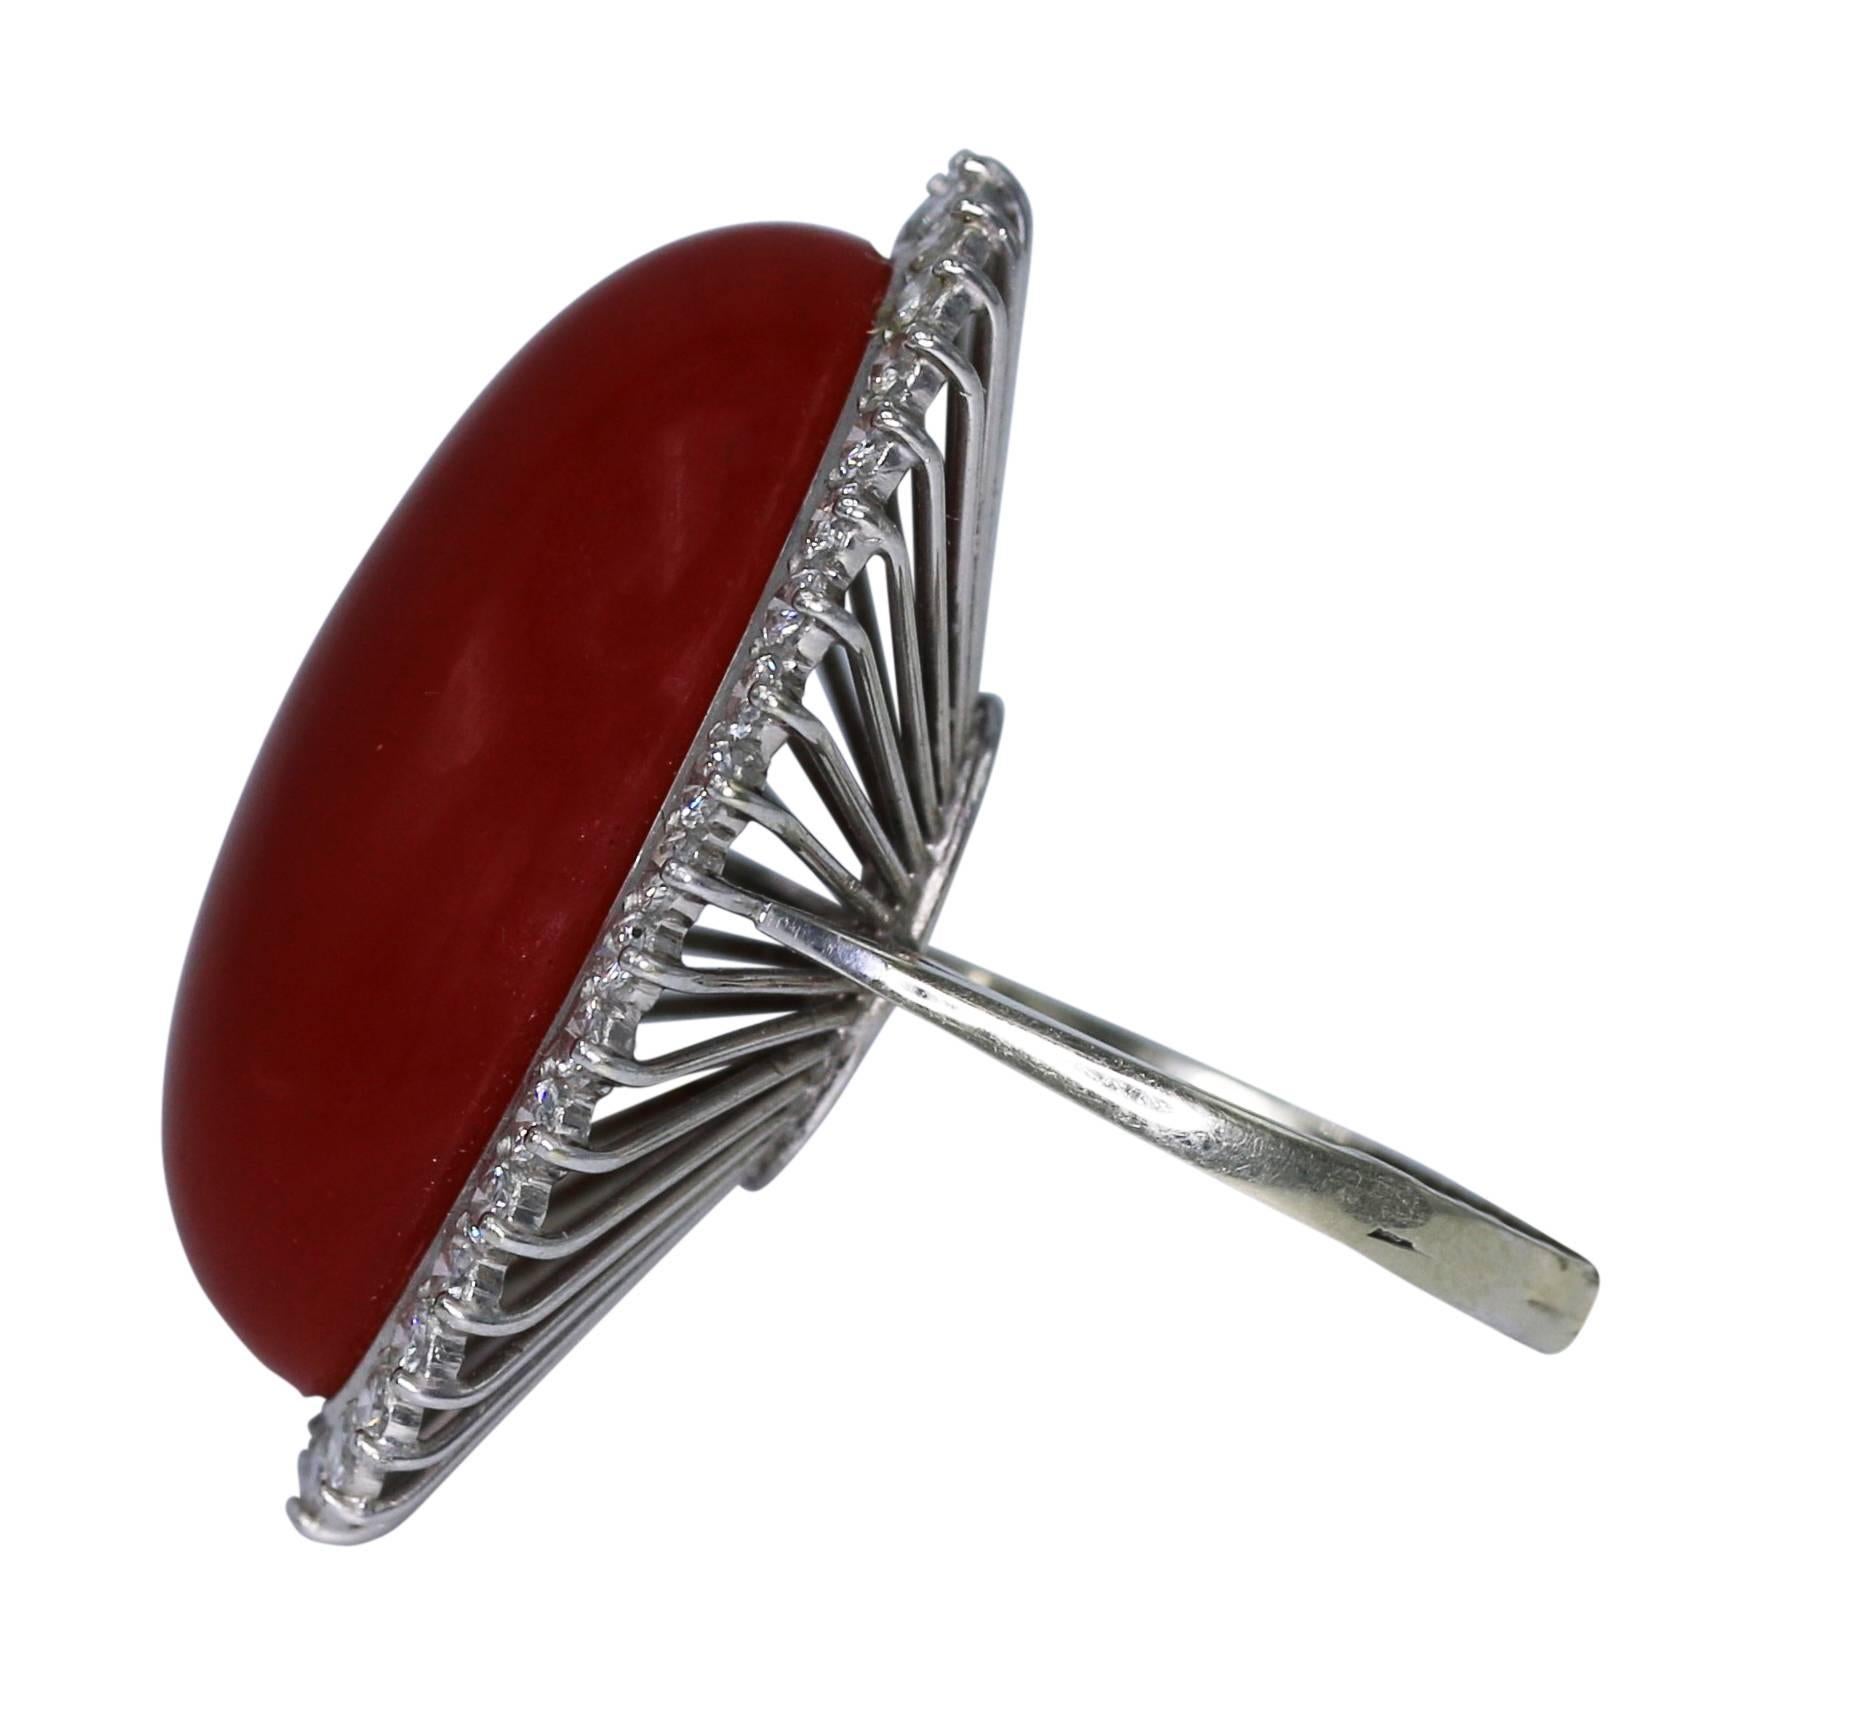 18 karat white gold, natural coral and diamond ring, set in the center with a natural dark red oval coral cabochon, framed by round diamonds weighing approximately 1.10 carats, size 6 1/2, measuring 1 1/4 by 1 by 1 1/2 inches. Accompanied by GIA